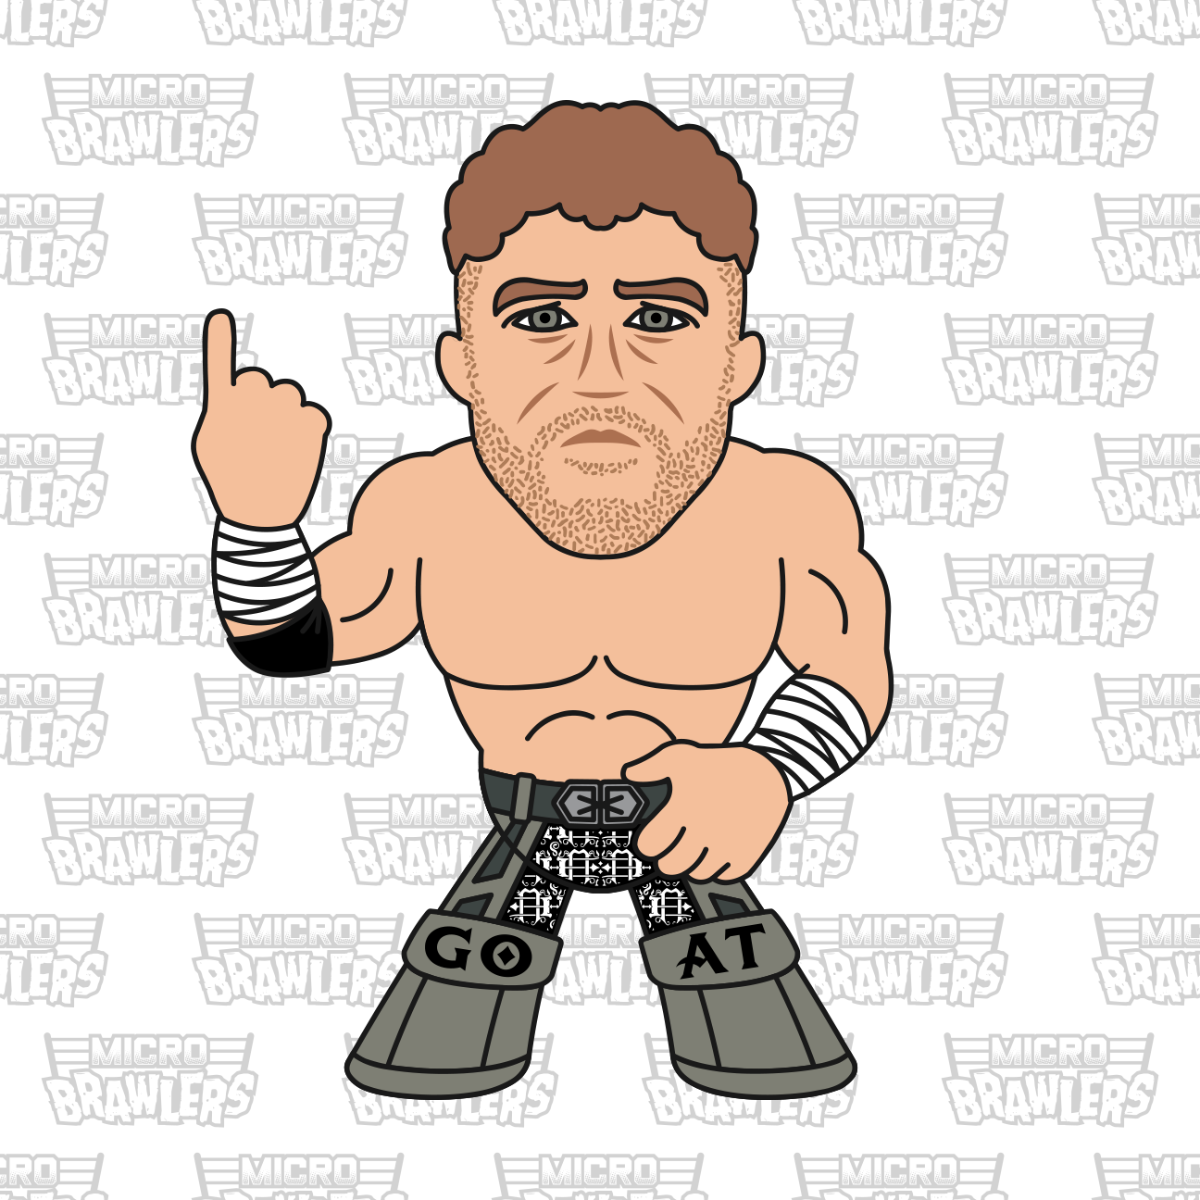 2023 Pro Wrestling Tees Limited Edition Micro Brawler Will Ospreay